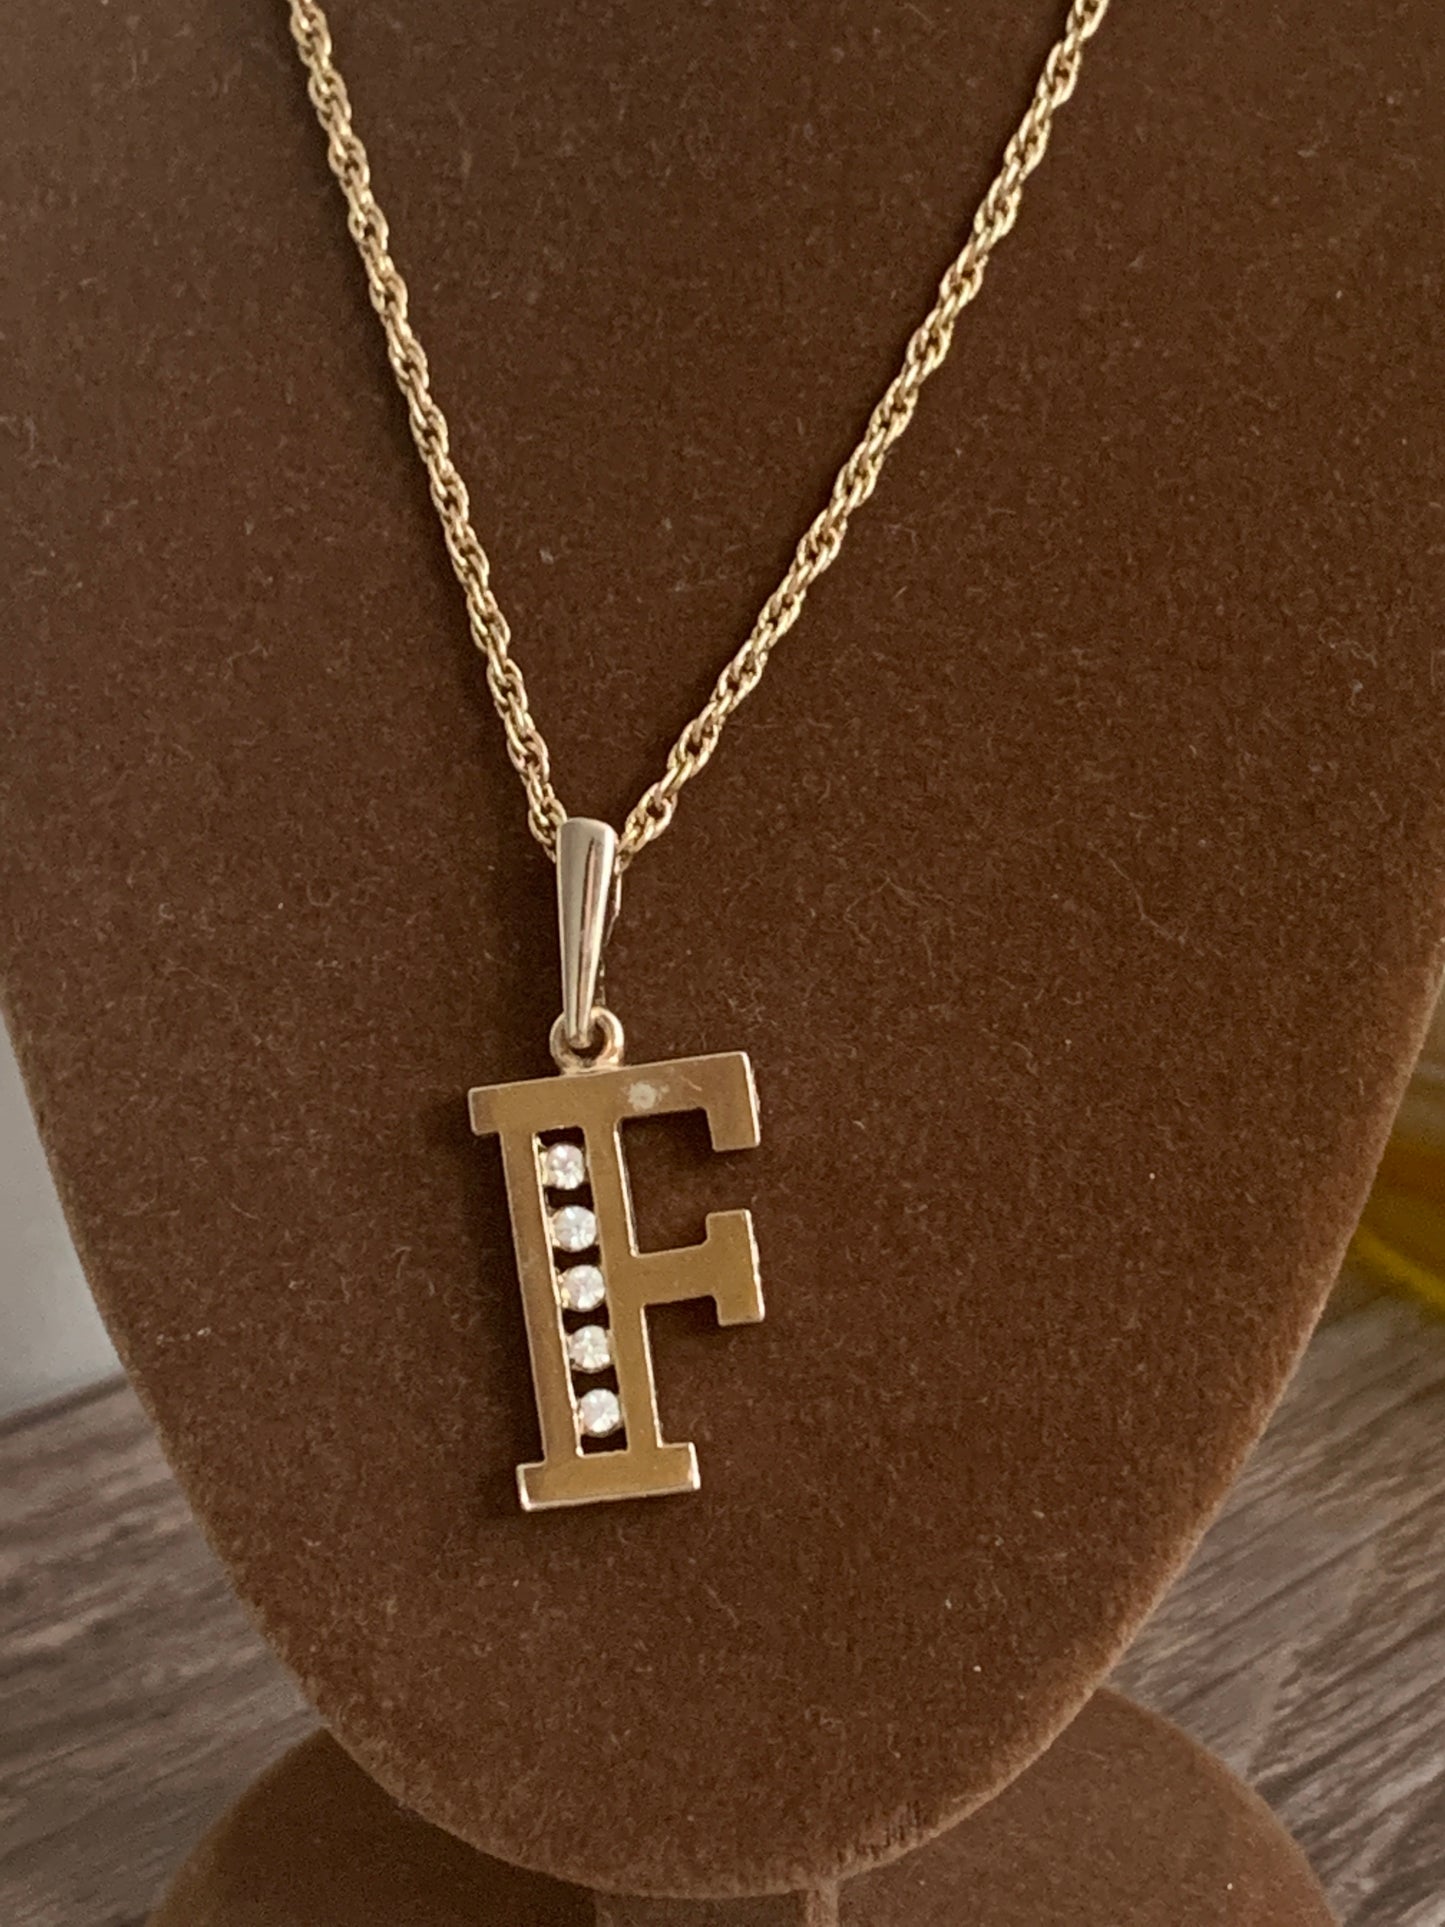 Vintage Letter F Necklace Rhinestone Initial F Necklace